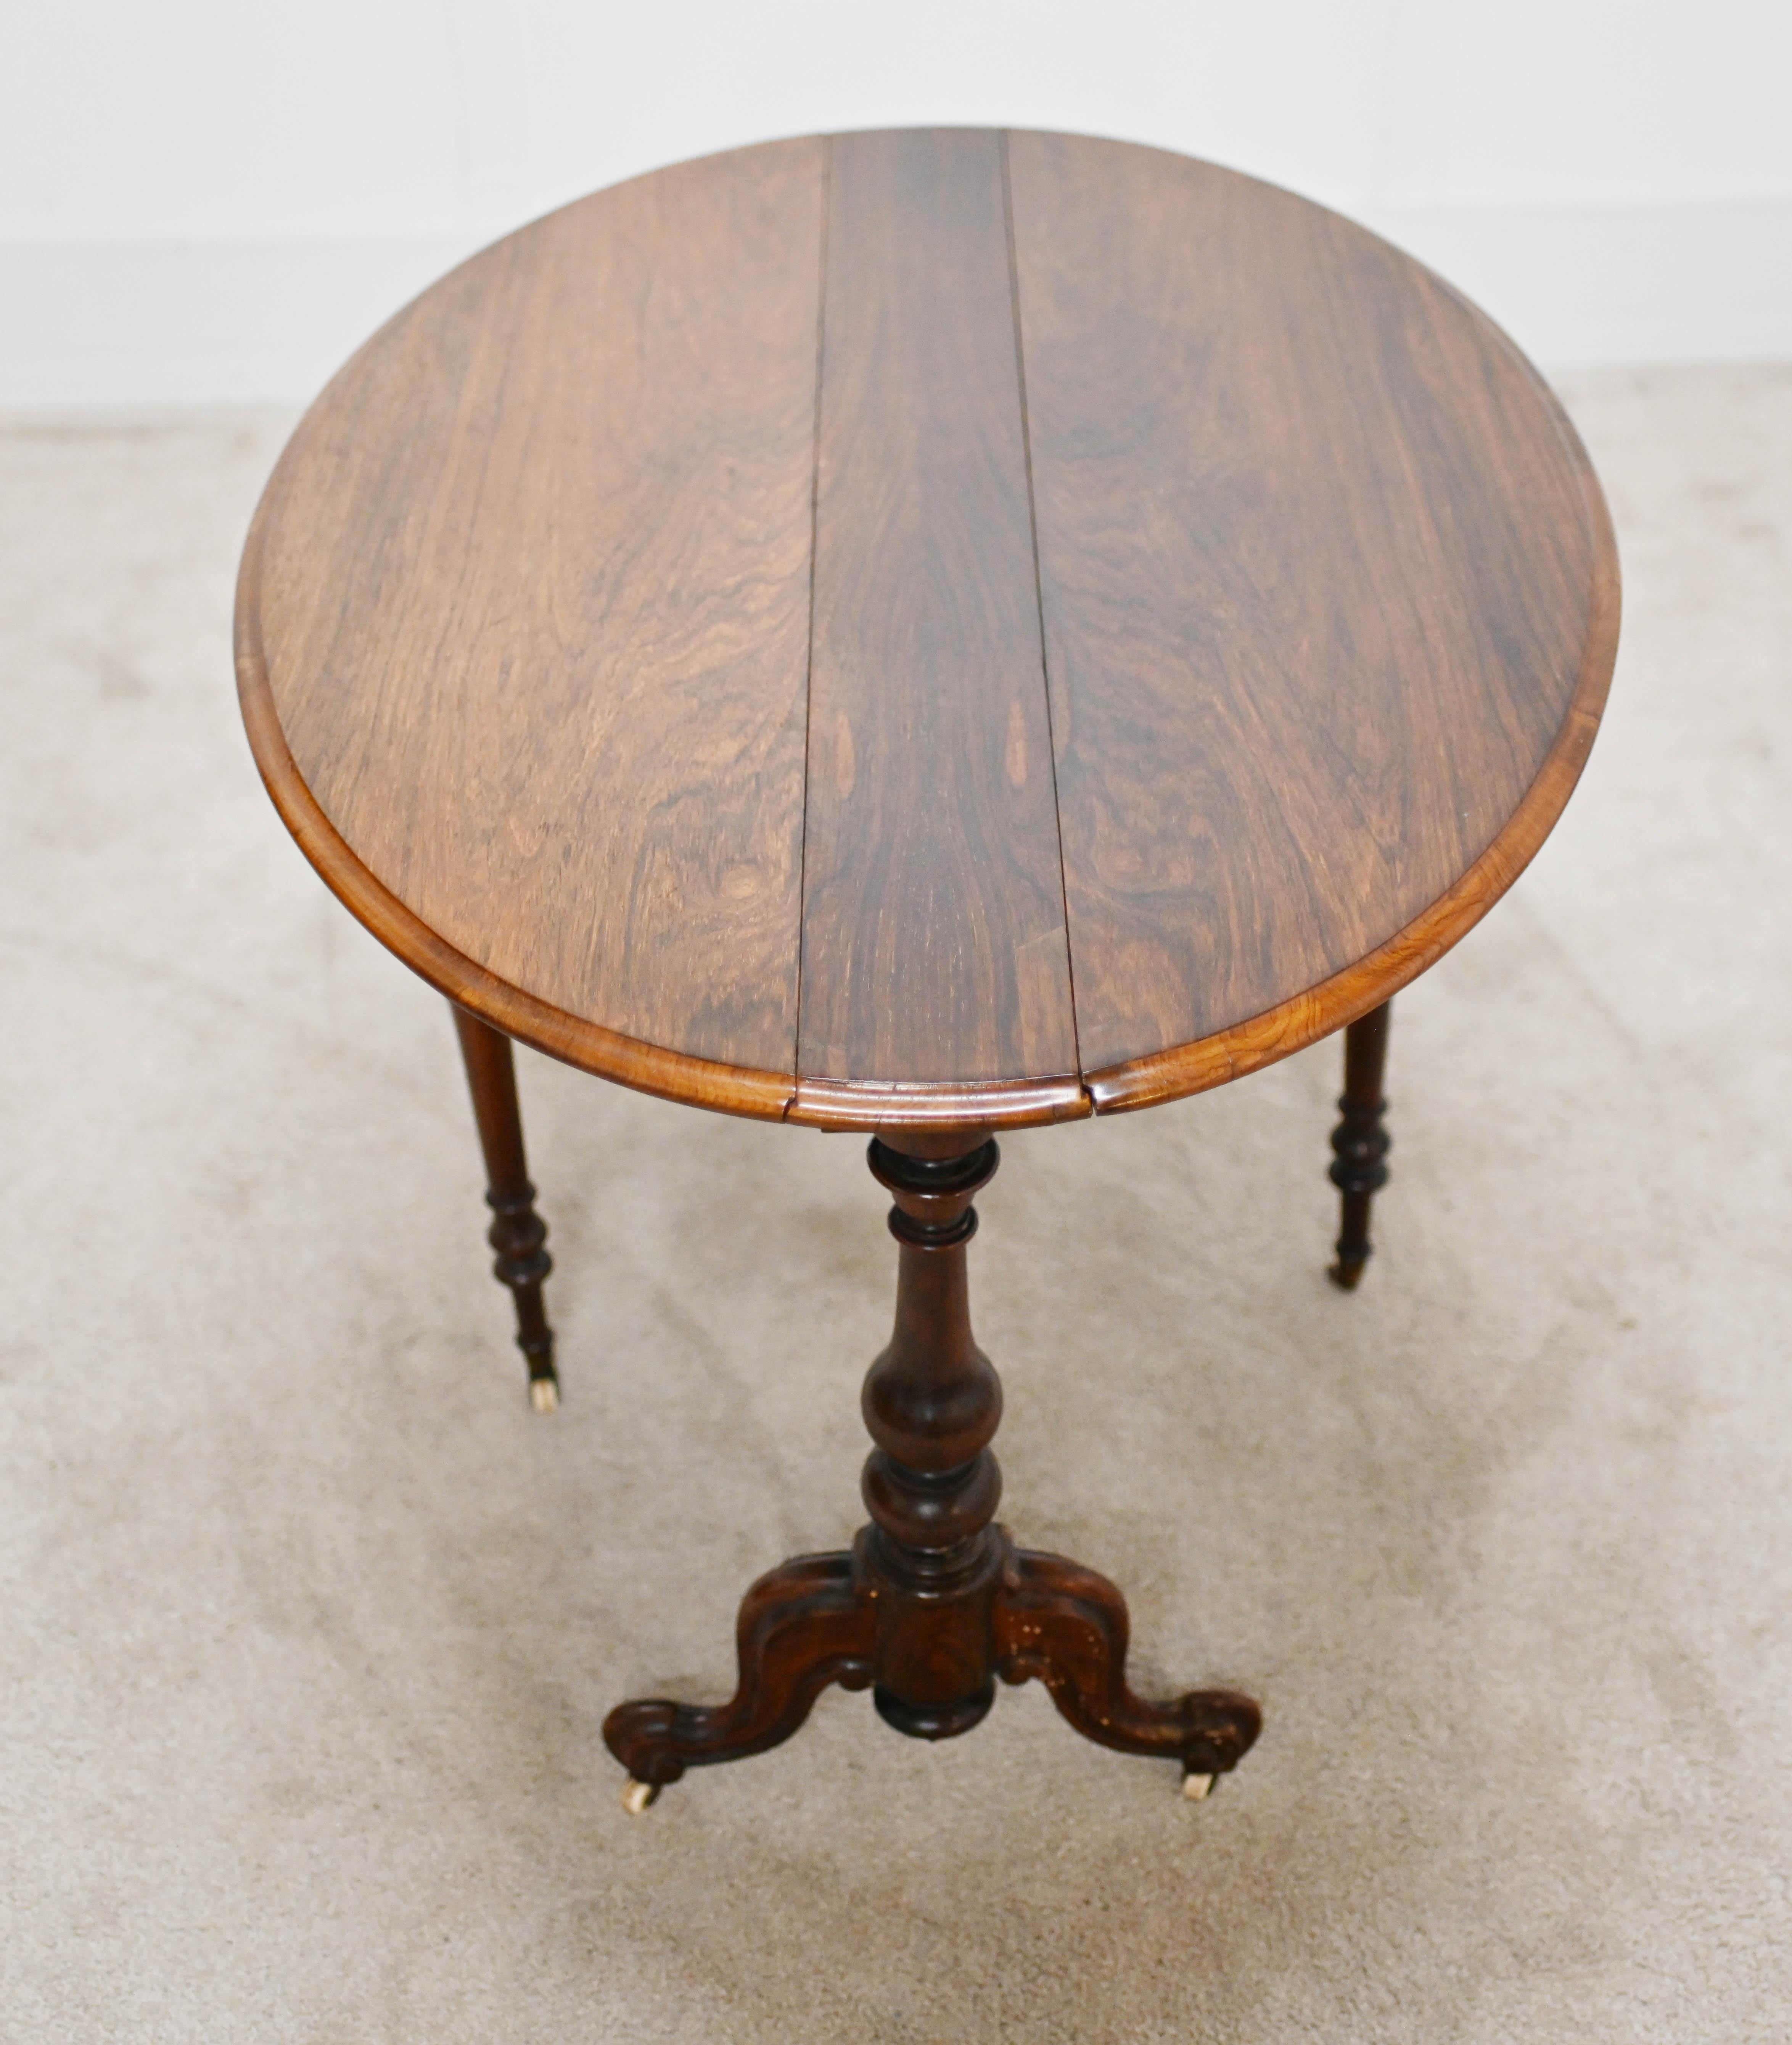 Mahogany Antique Sutherland Table Drop Leaf Side Tables 1880 For Sale